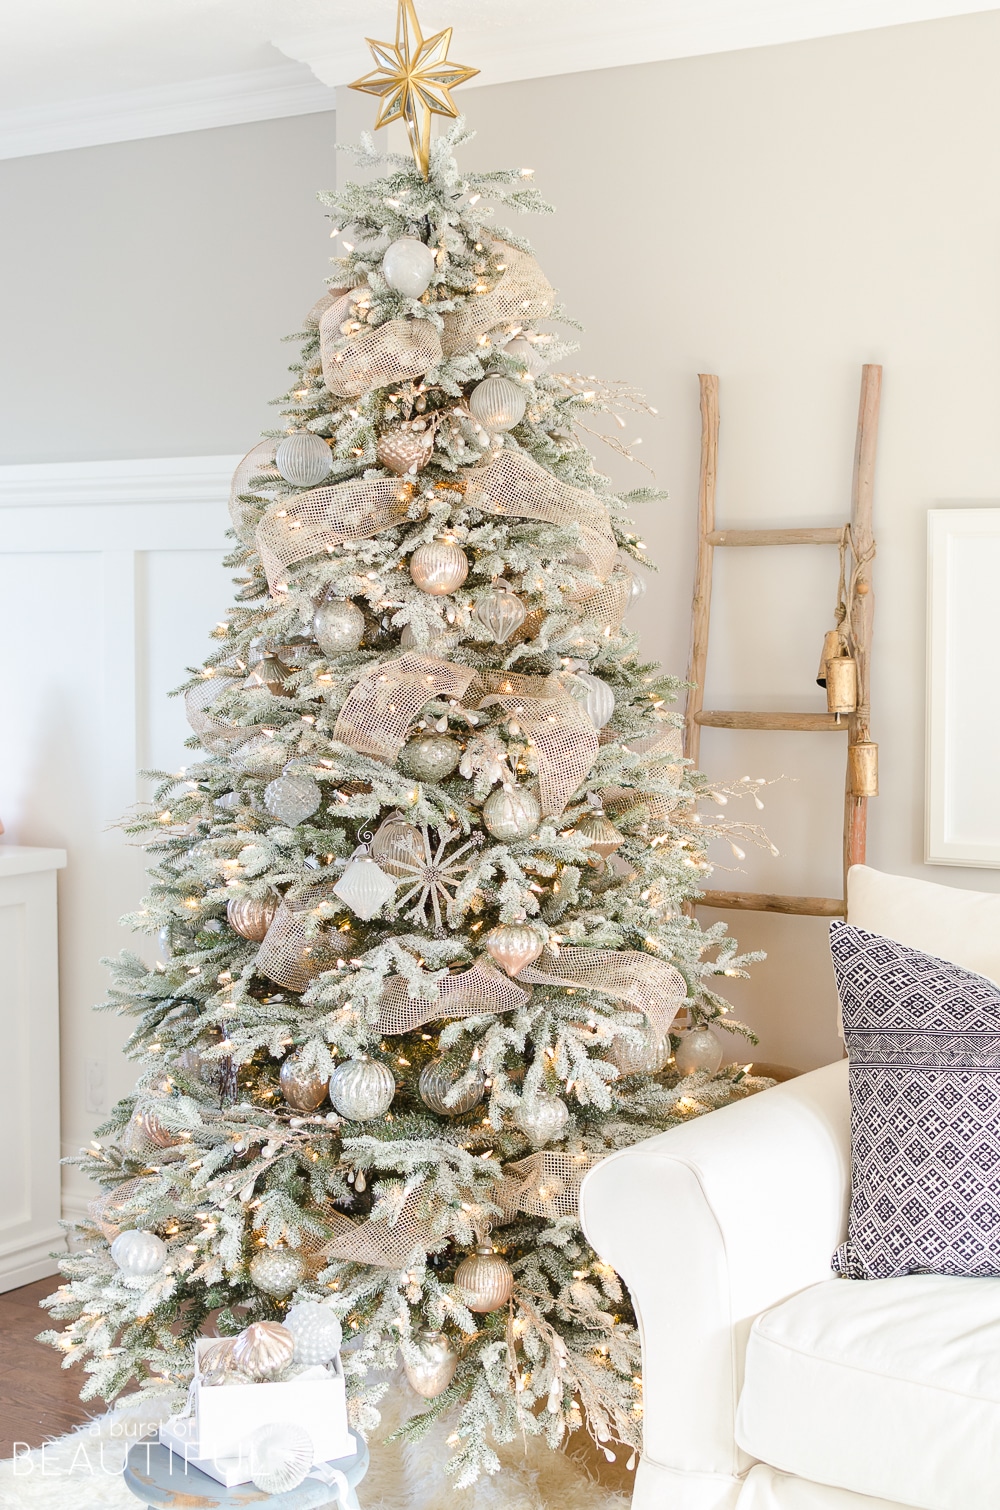 The Prettiest Flocked Christmas Trees - The Turquoise Home